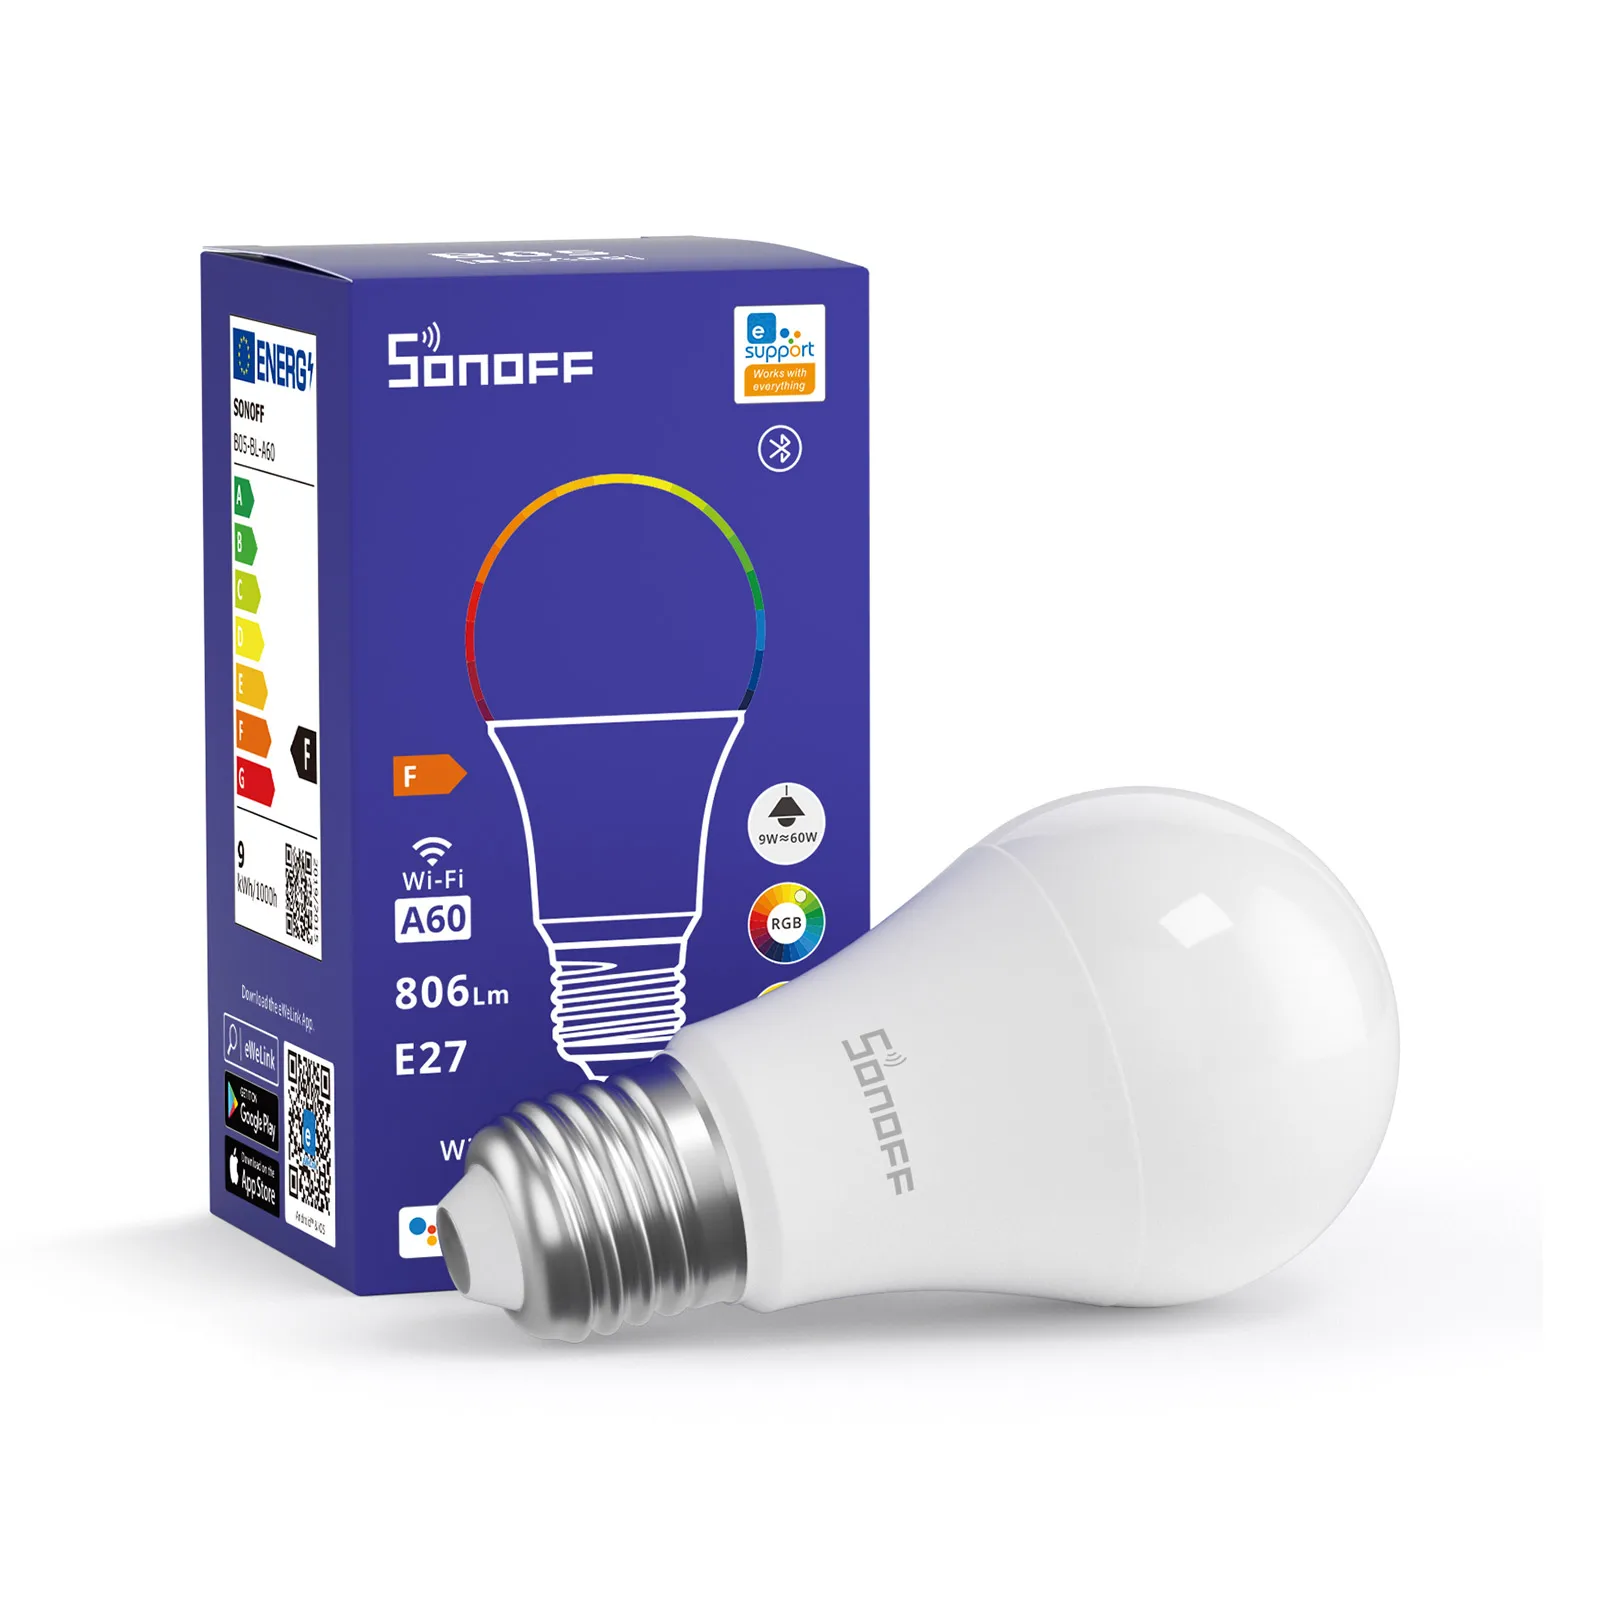 

Sonoff Smart WiFi Bulb E27 9W Ewelink APP Control Alice Alexa Voice Control Dimmable LED Lamp Works With Google Home